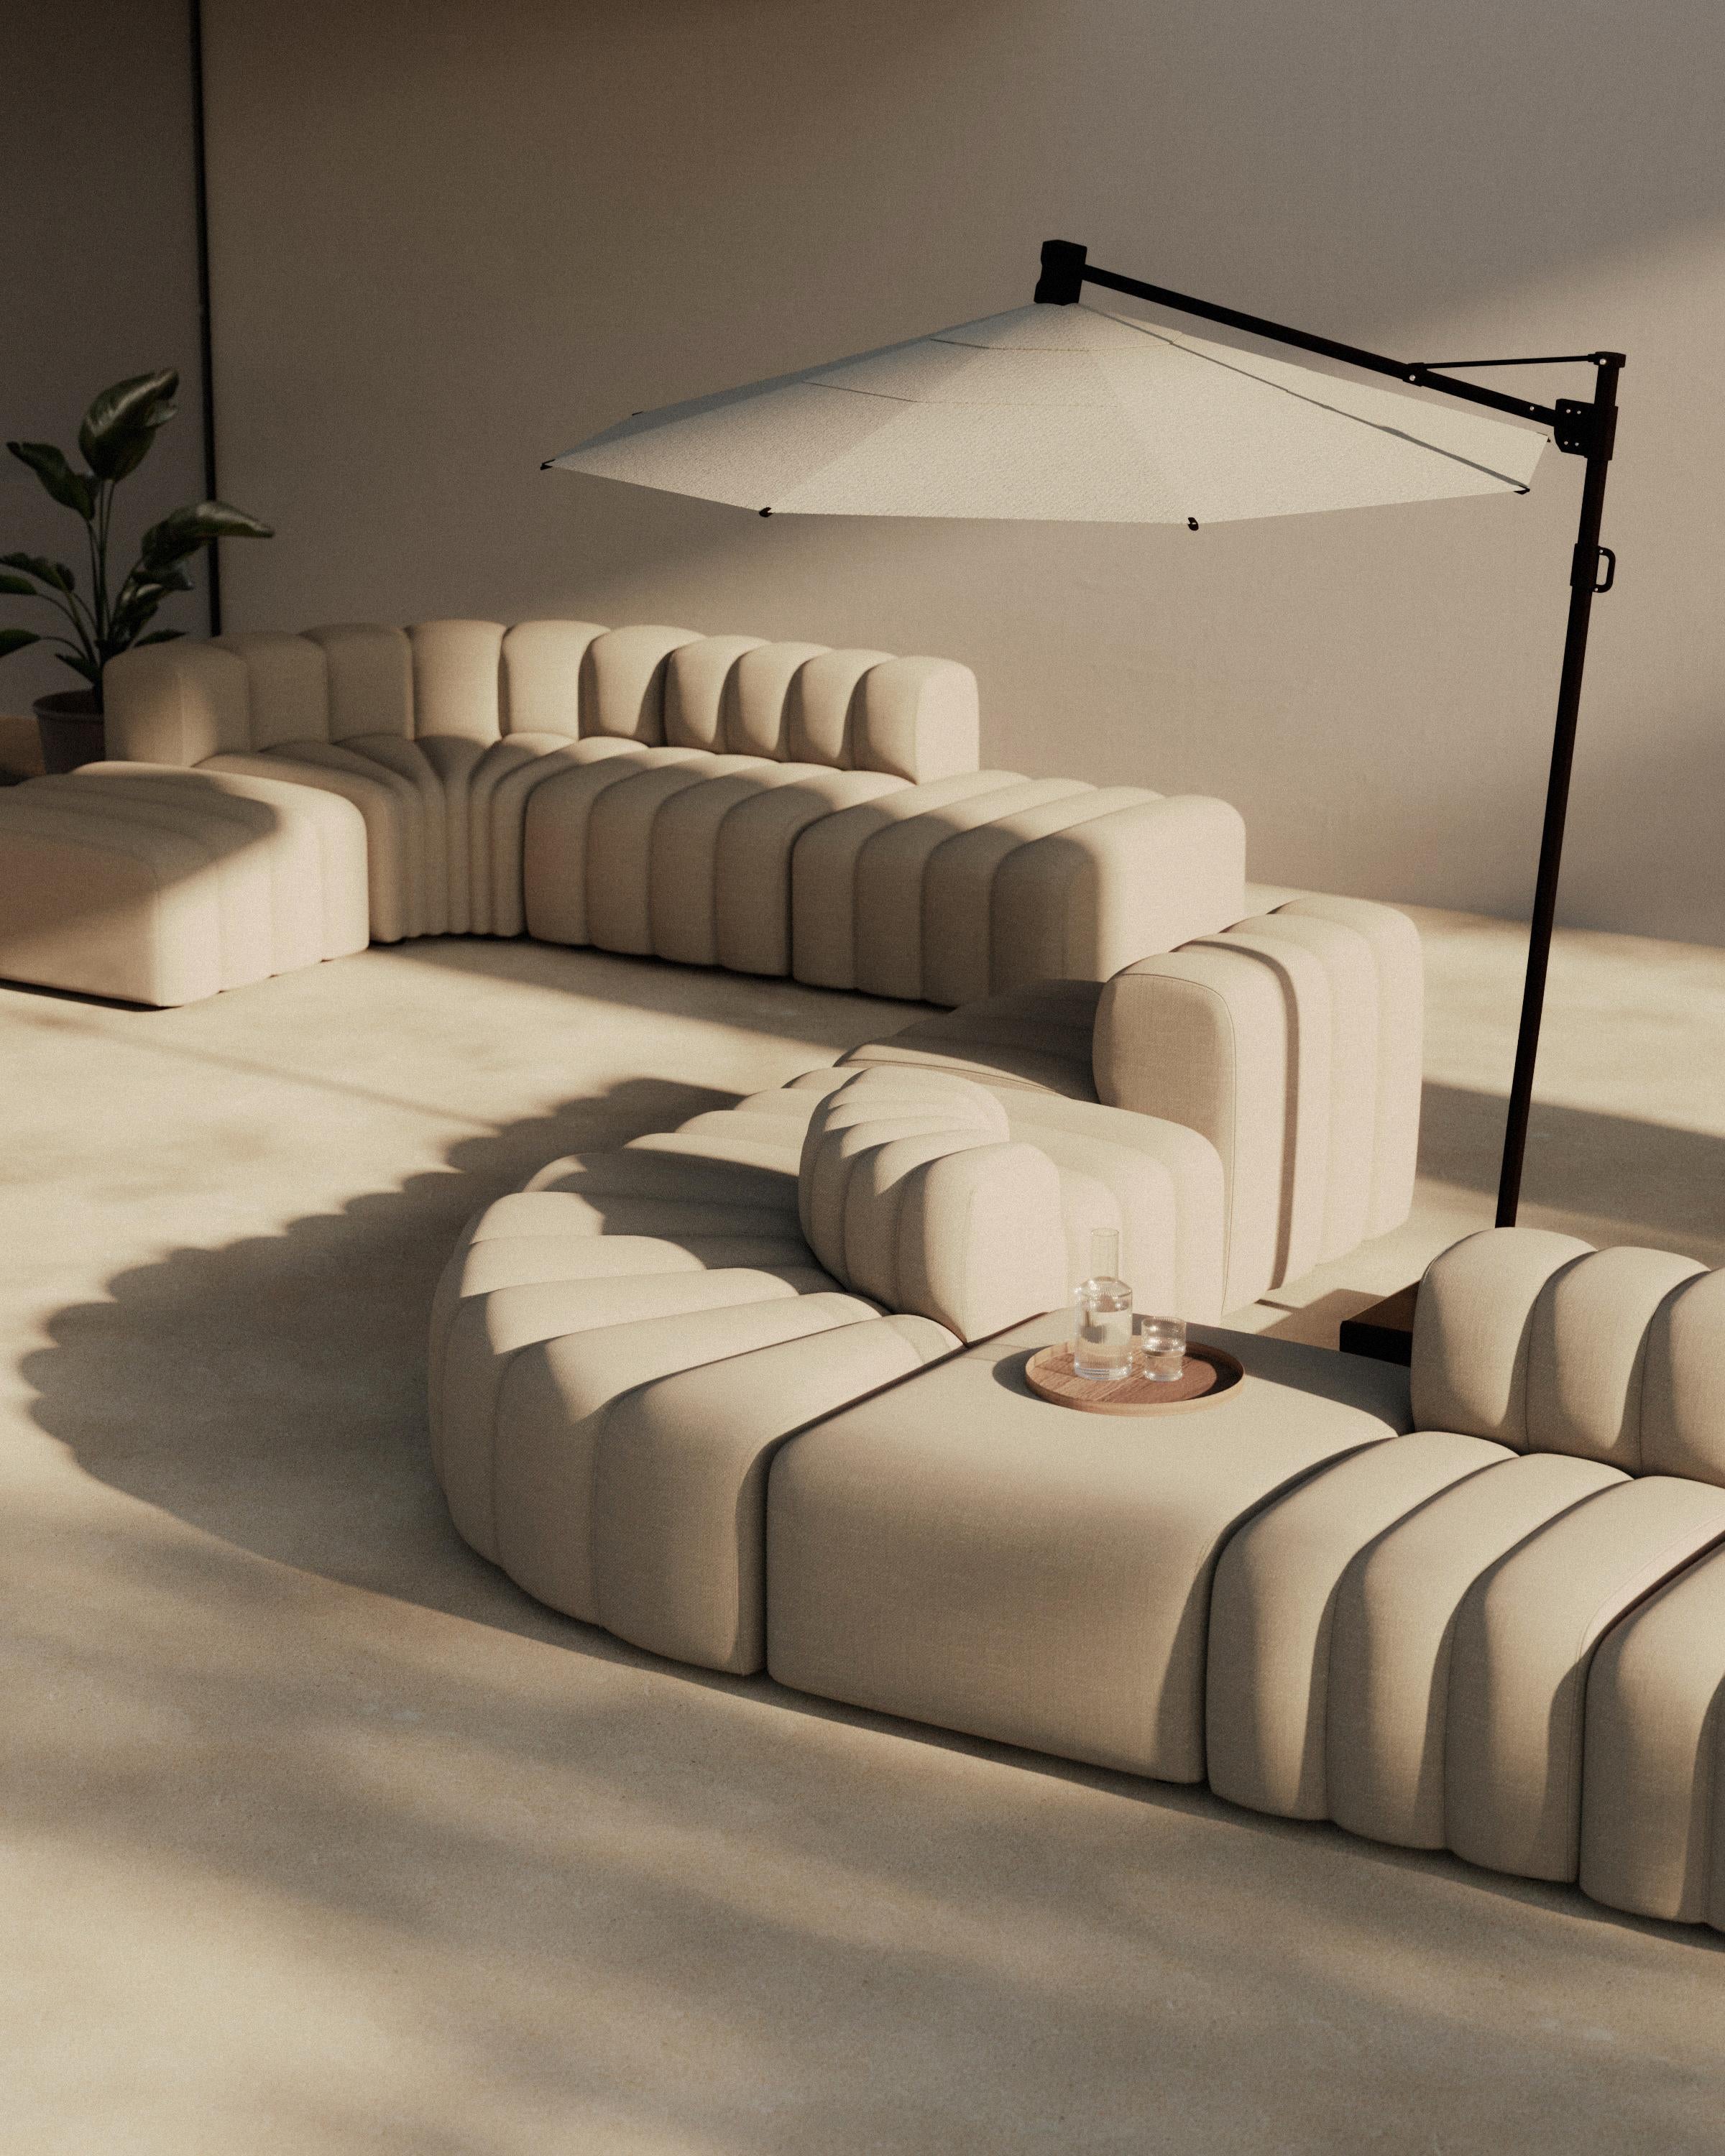 Danish Studio Curve Modular Outdoor Sofa by NORR11 For Sale